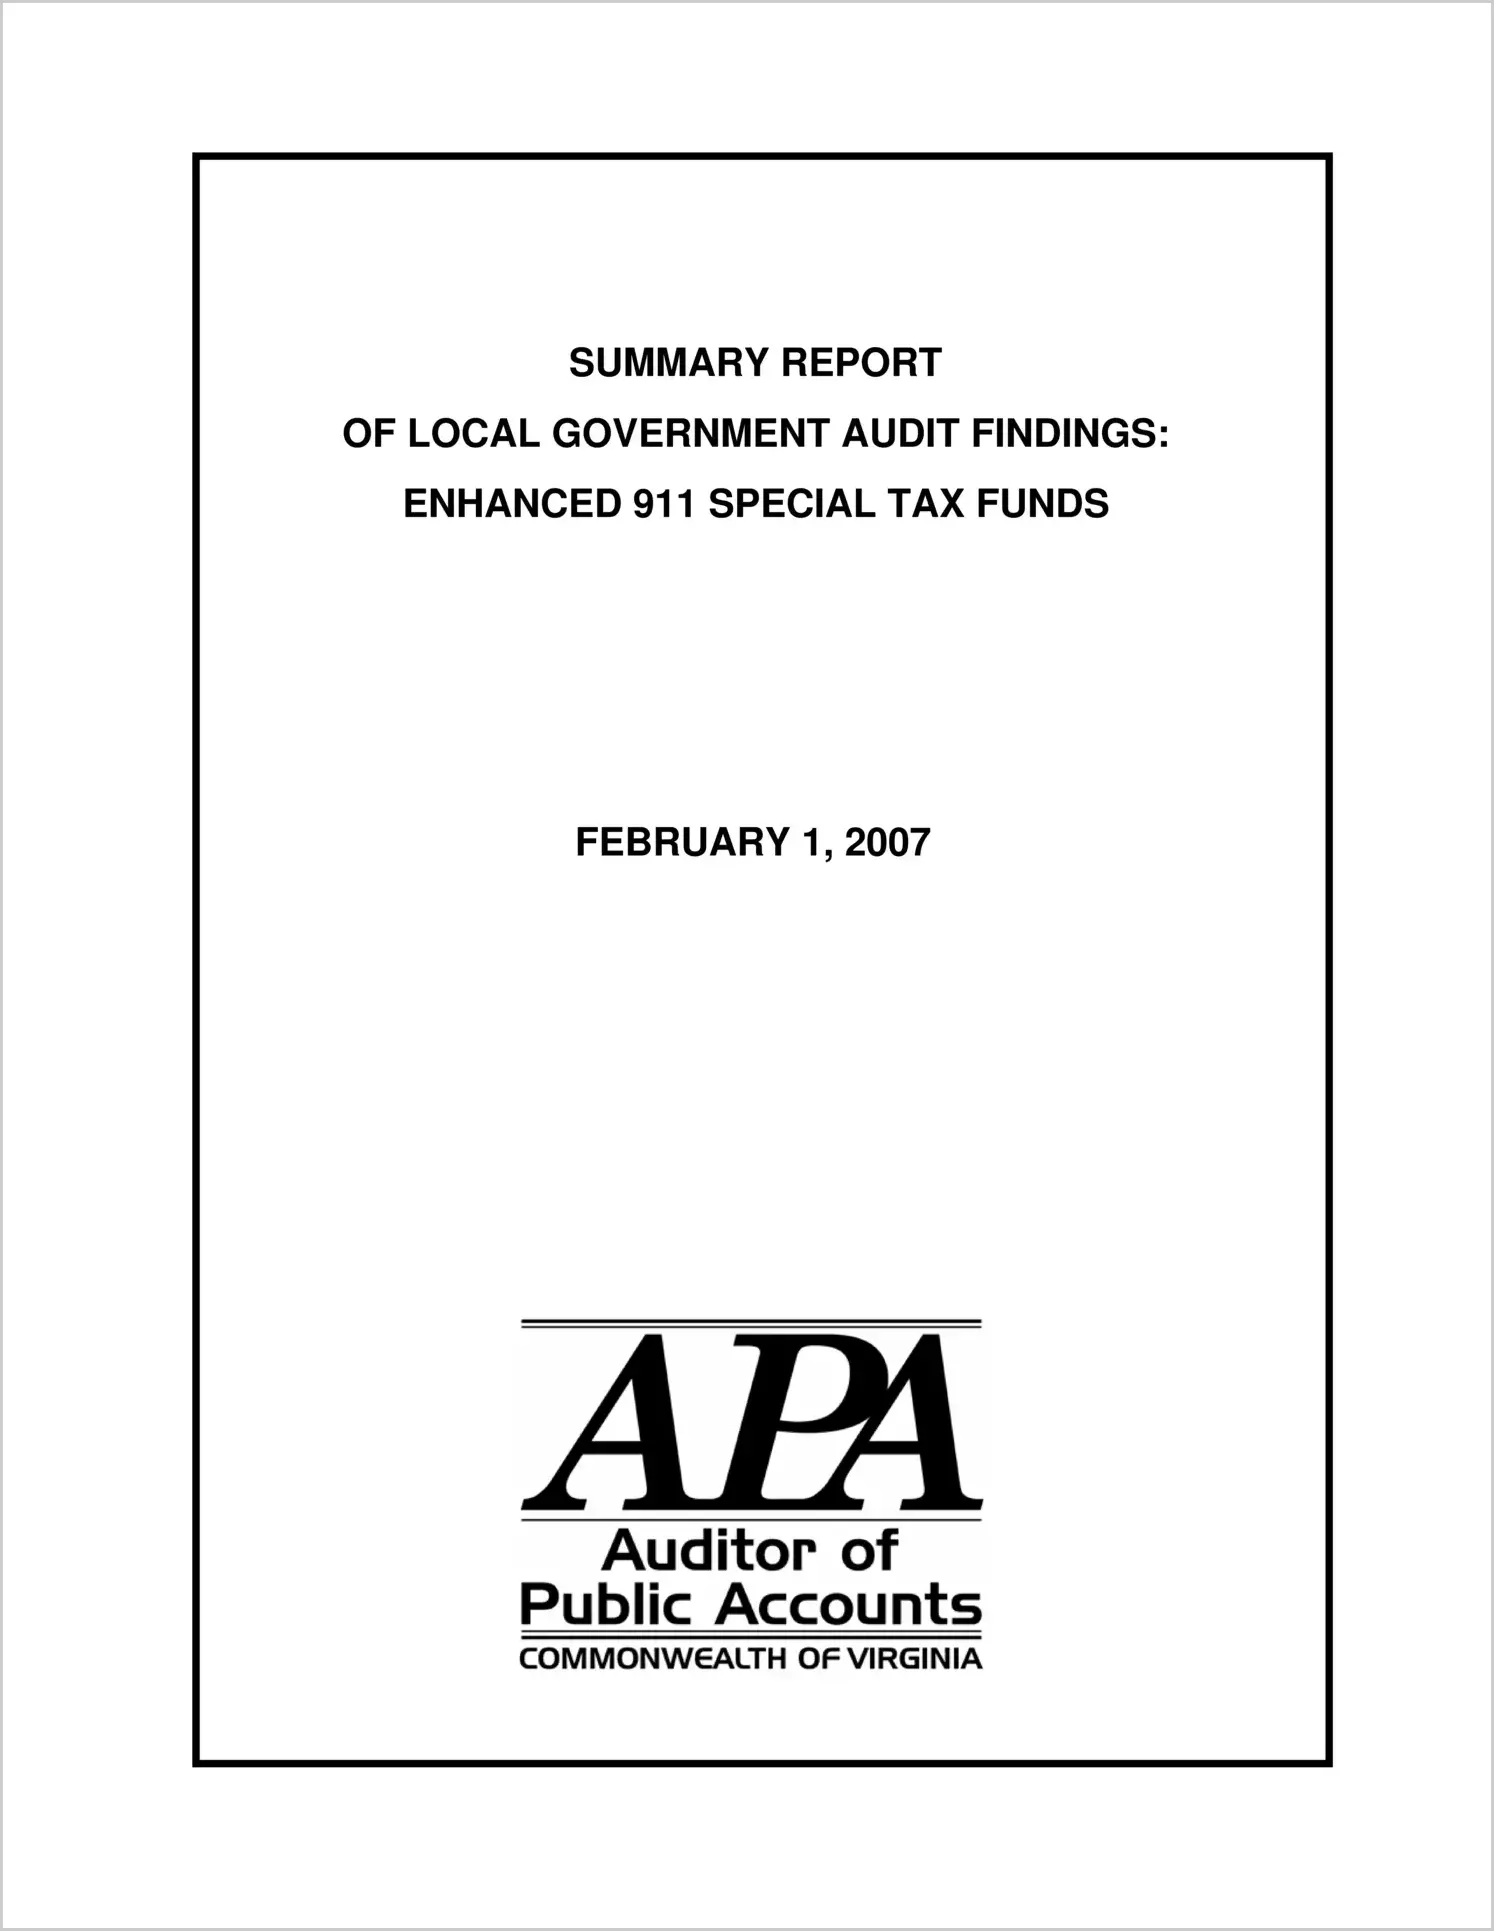 Special ReportSummary Report of Local Government Audit Findings: Enhanced 911 Special Tax Funds(Report Date: 2/1/2007)